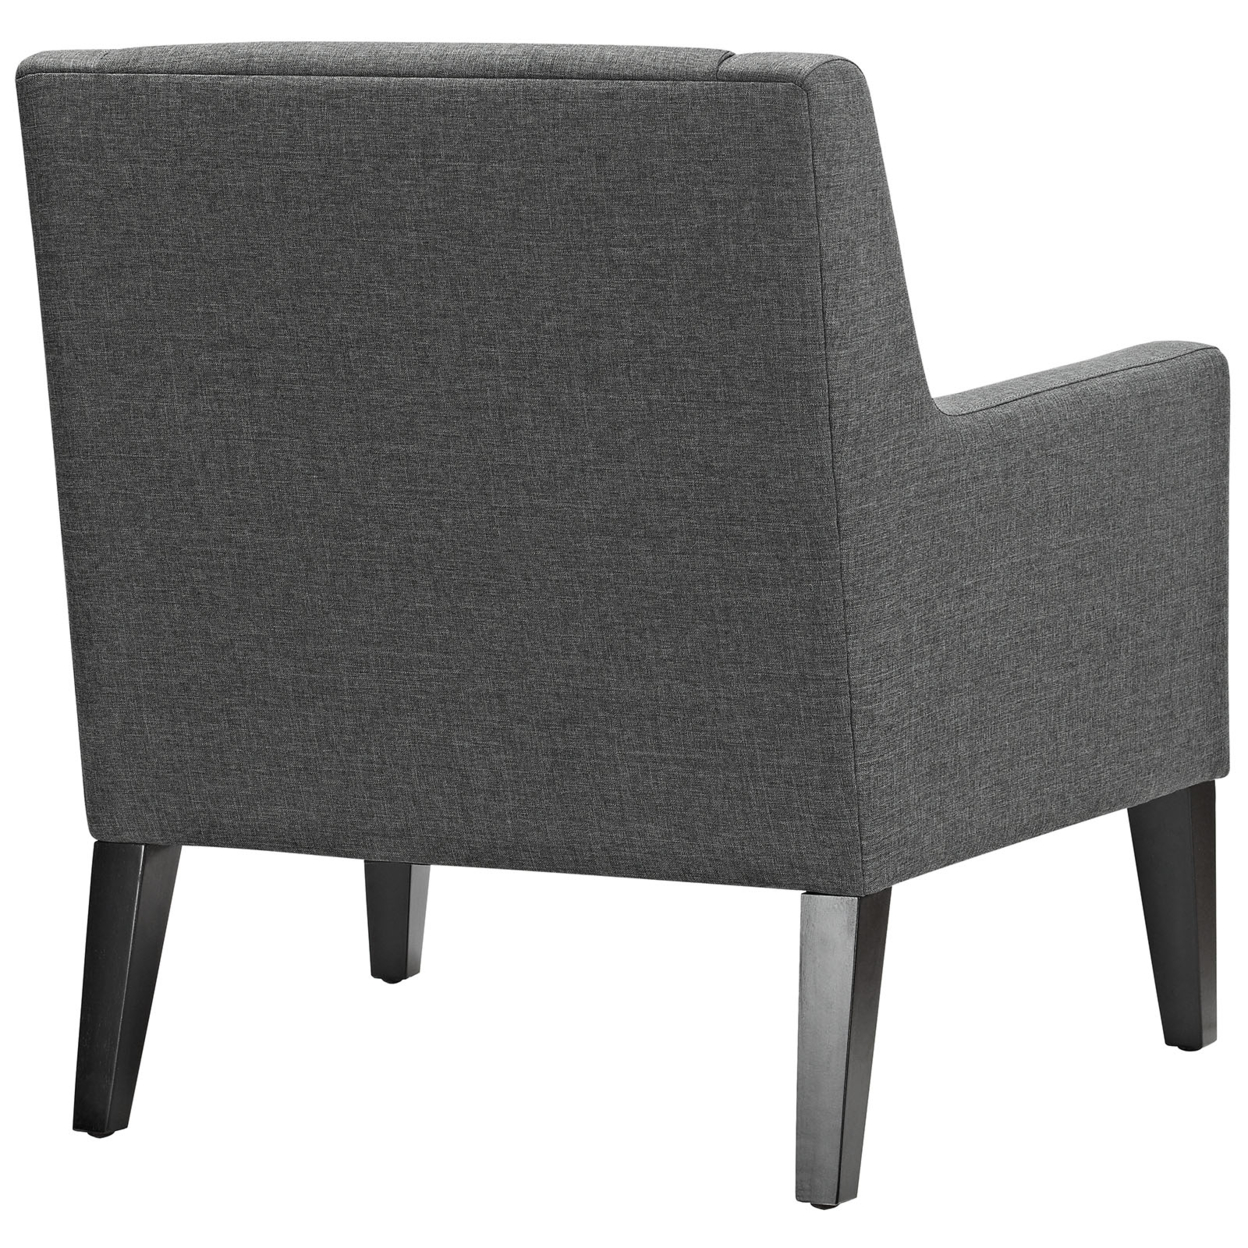 Earnest Upholstered Fabric Armchair, Gray